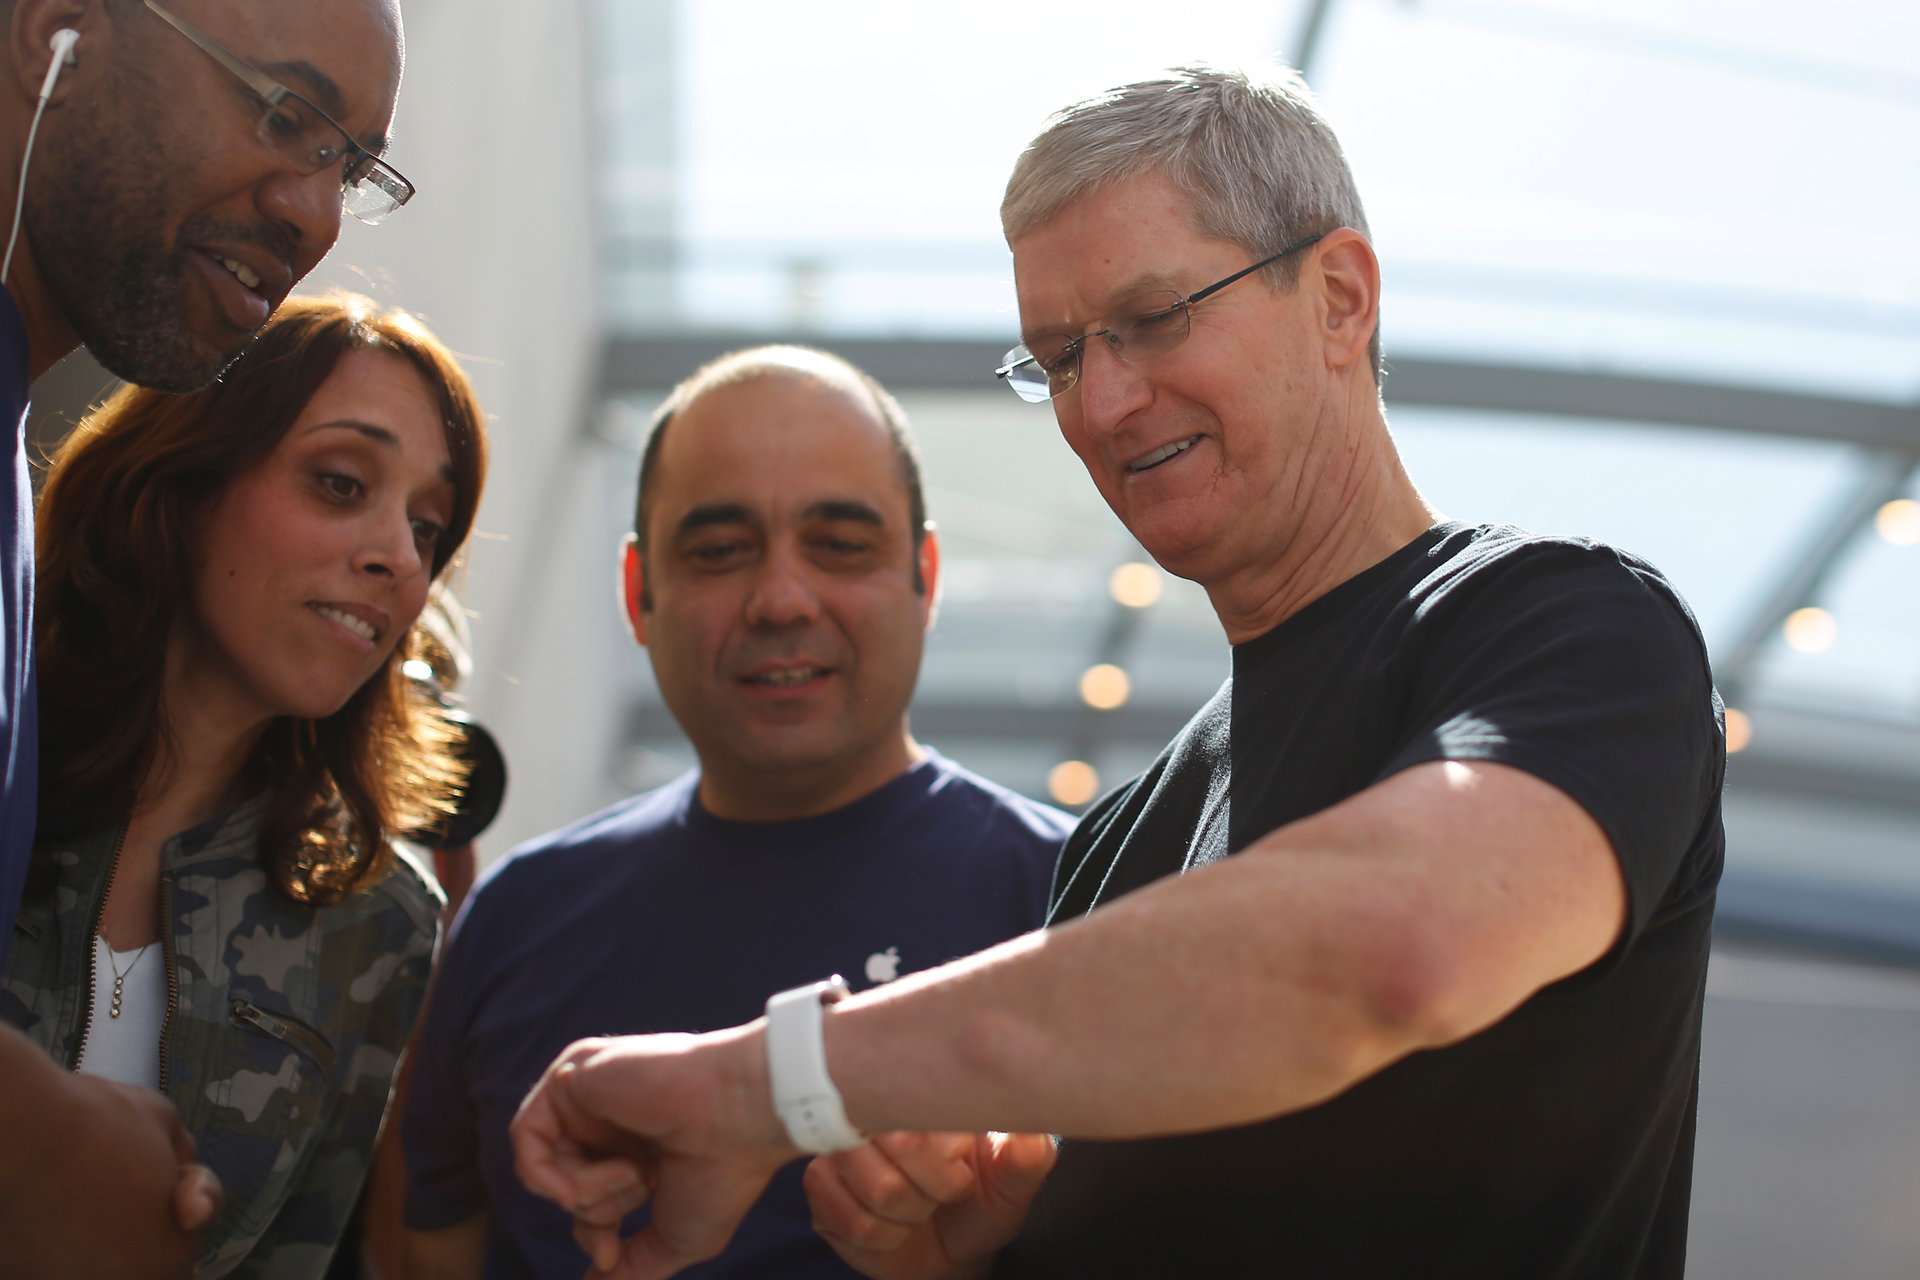 Here’s how Apple could use the Apple Watch to break into a whole new market for itself with healthcare